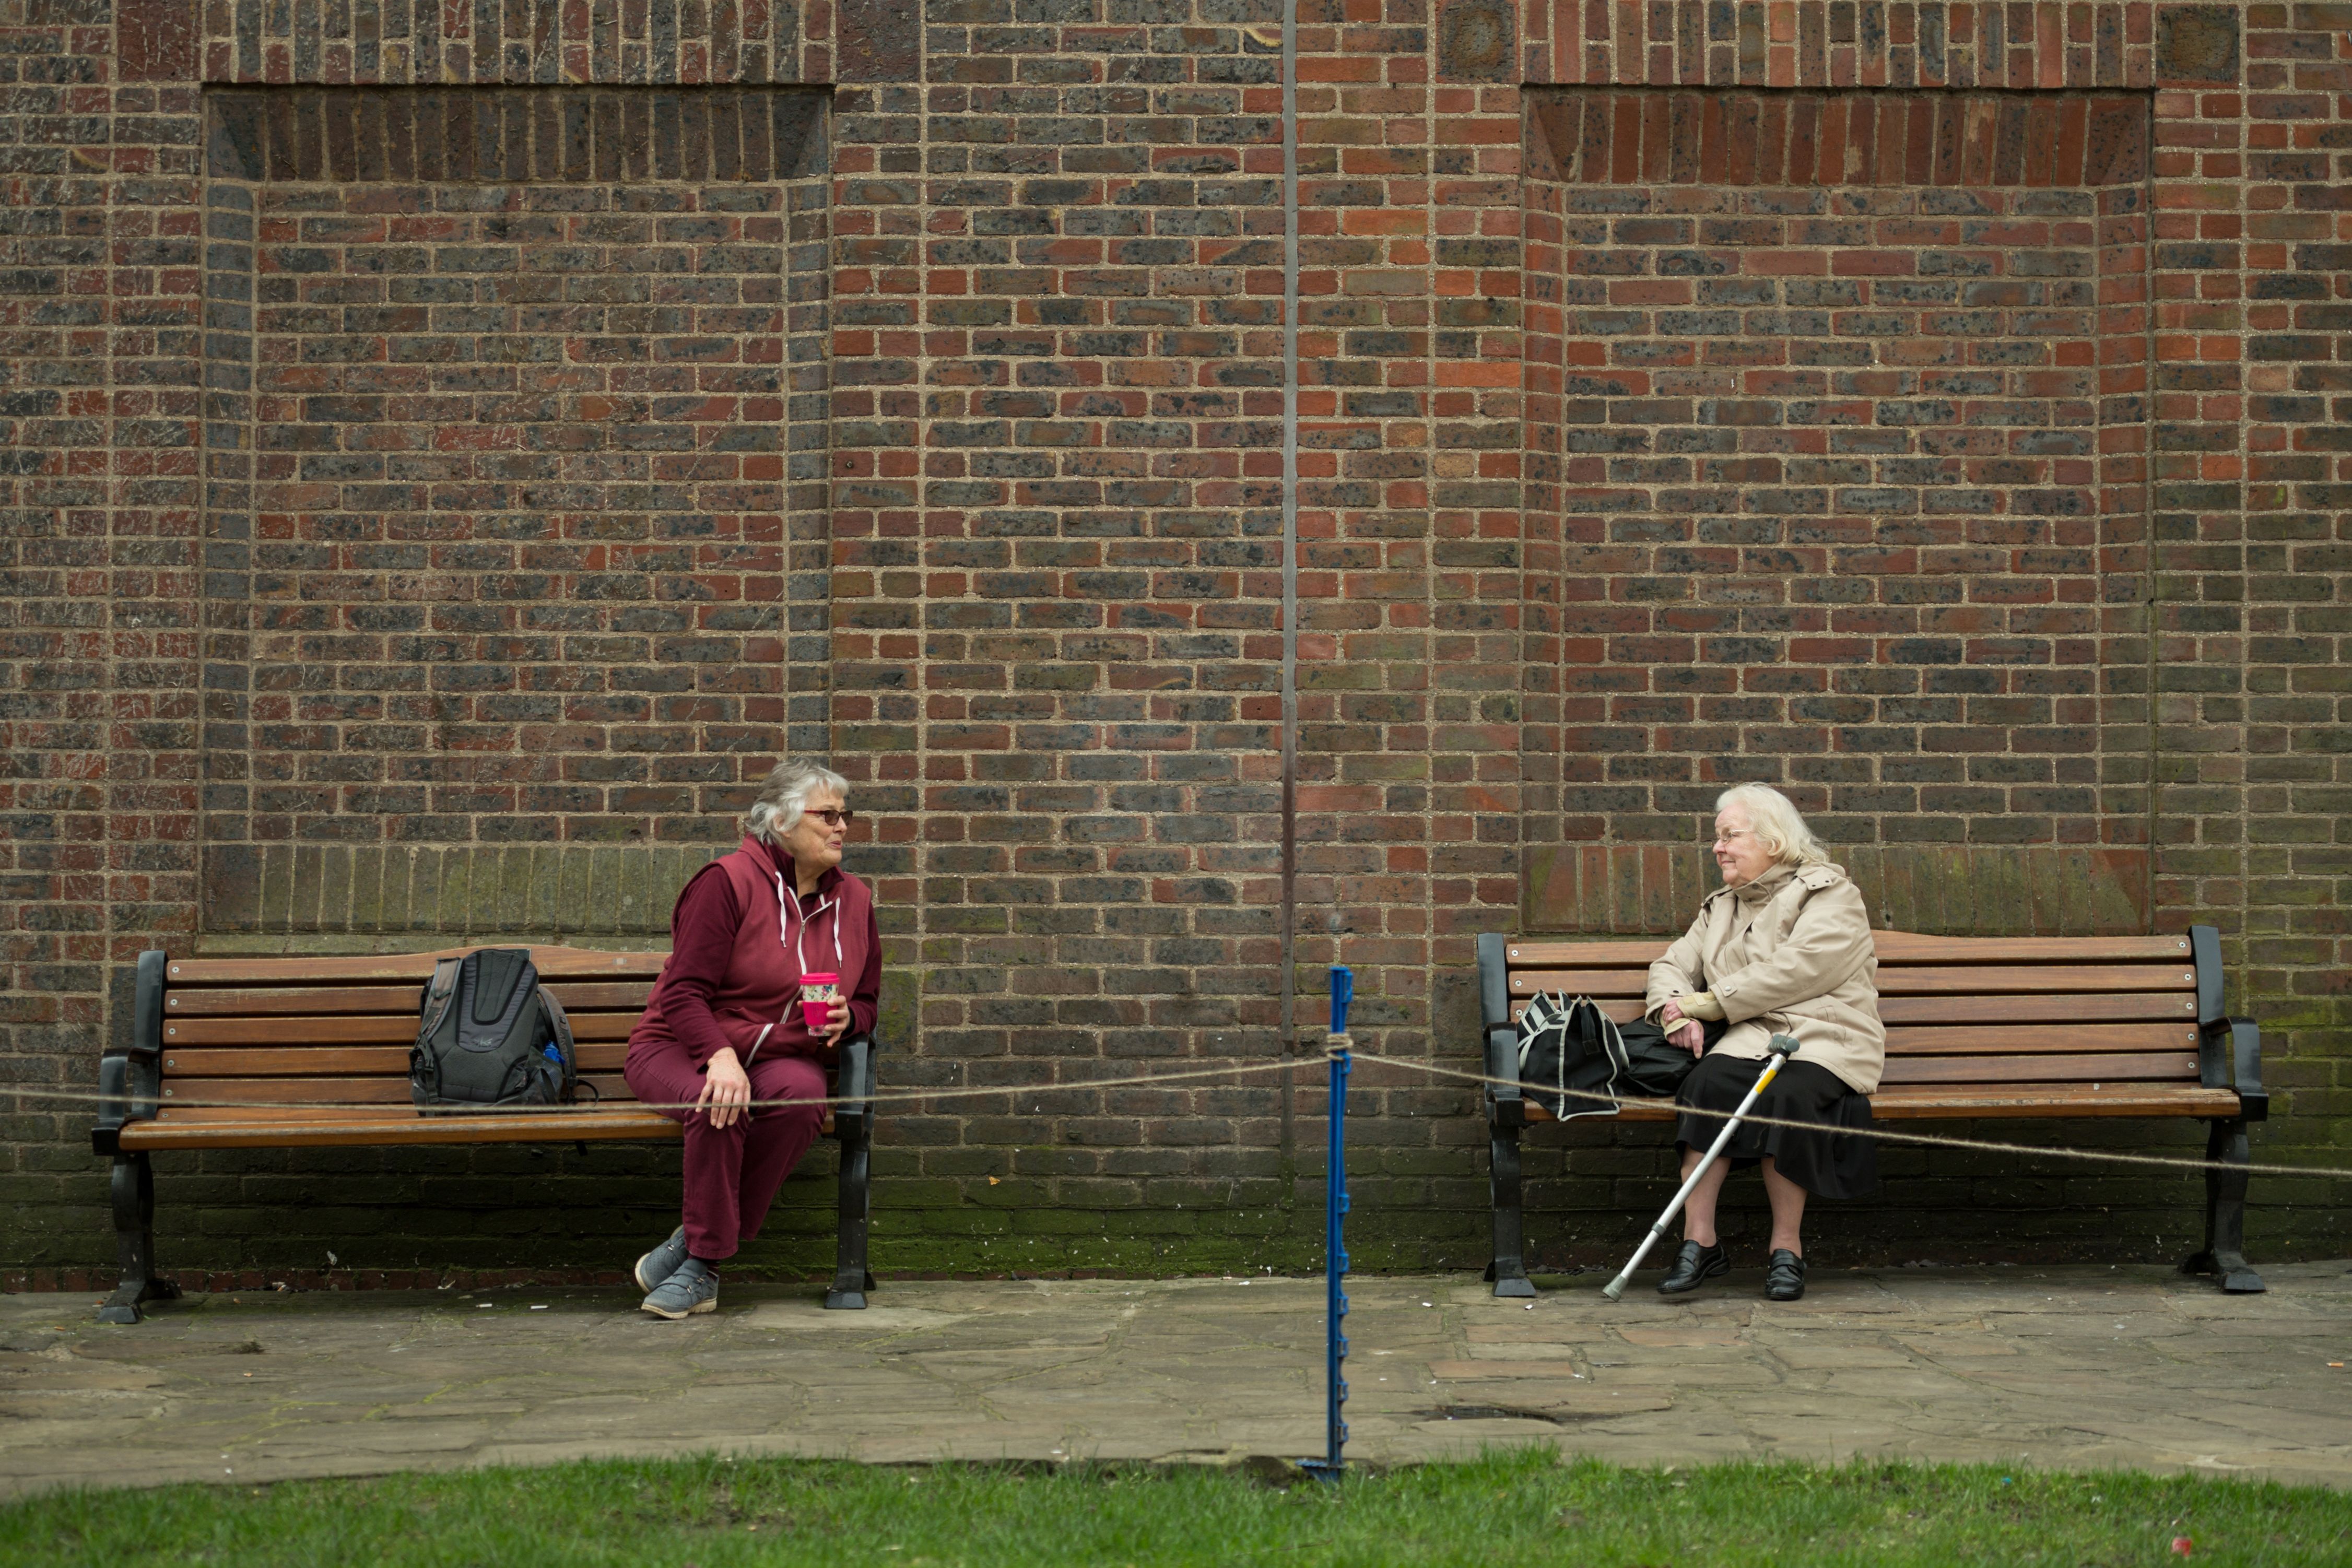  Two women observe social distancing measures as they speak to each other from adjacent park benches amidst the novel coronavirus COVID-19 pandemic, in the centre of York, northern England on March 19